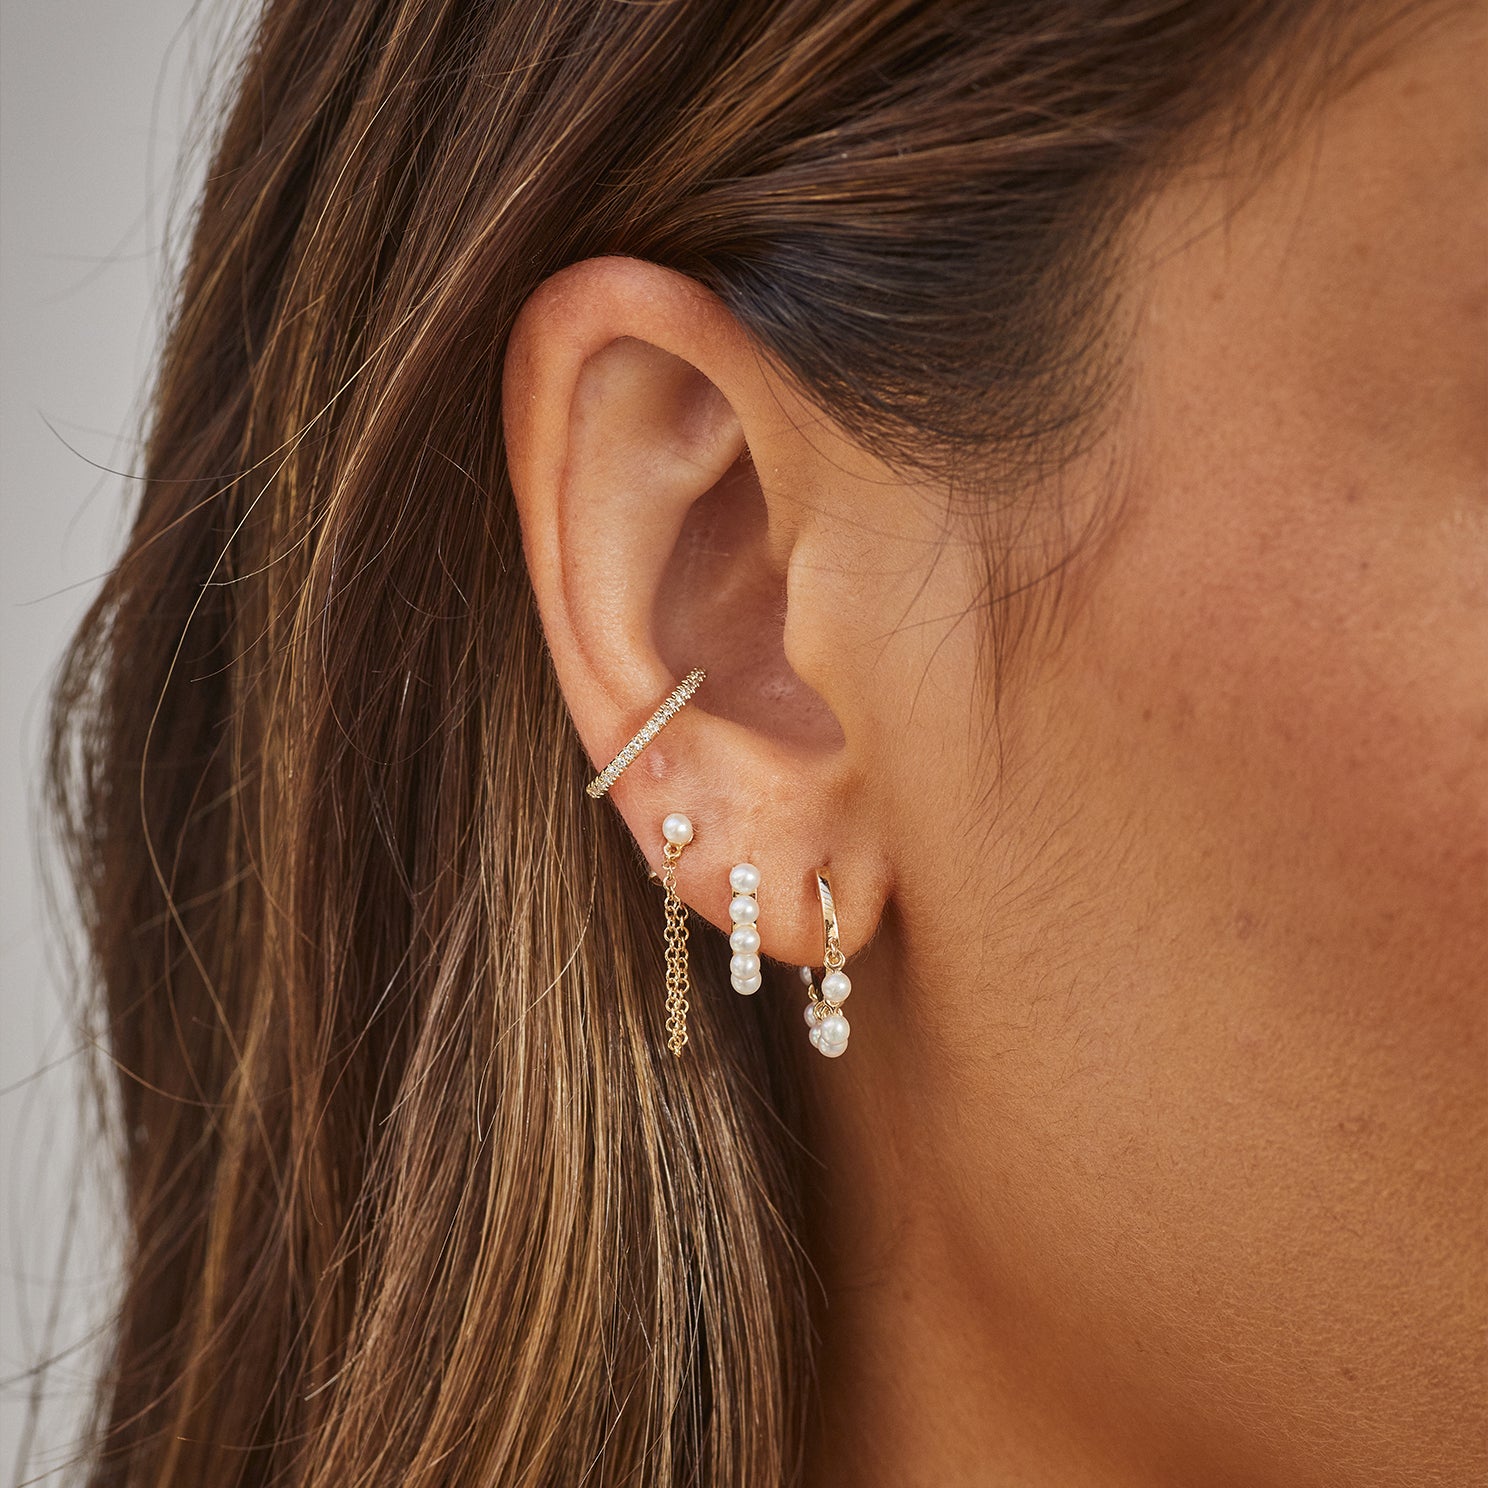 Pearl Chain Stud Earring styled on ear lobe of model with diamond, pearl, and gold earrings